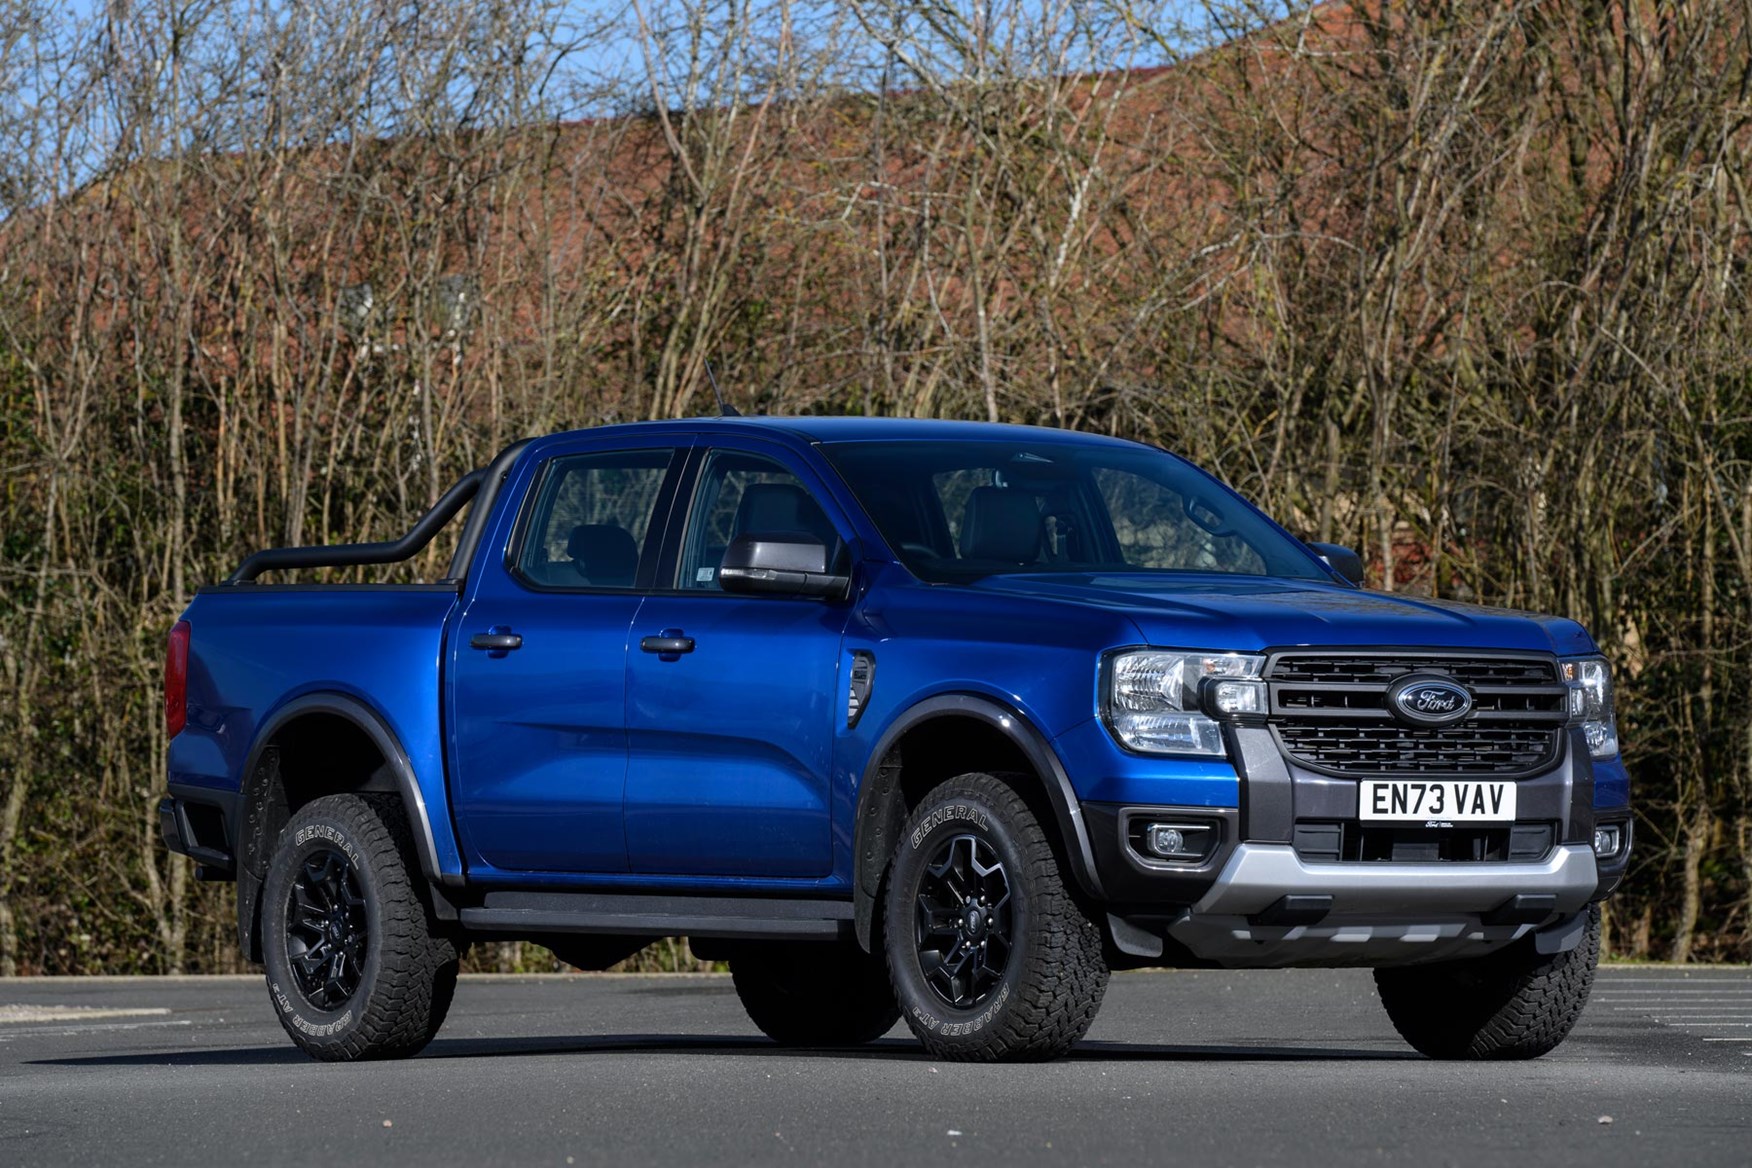 The Ford Ranger offers a version for almost every use case.